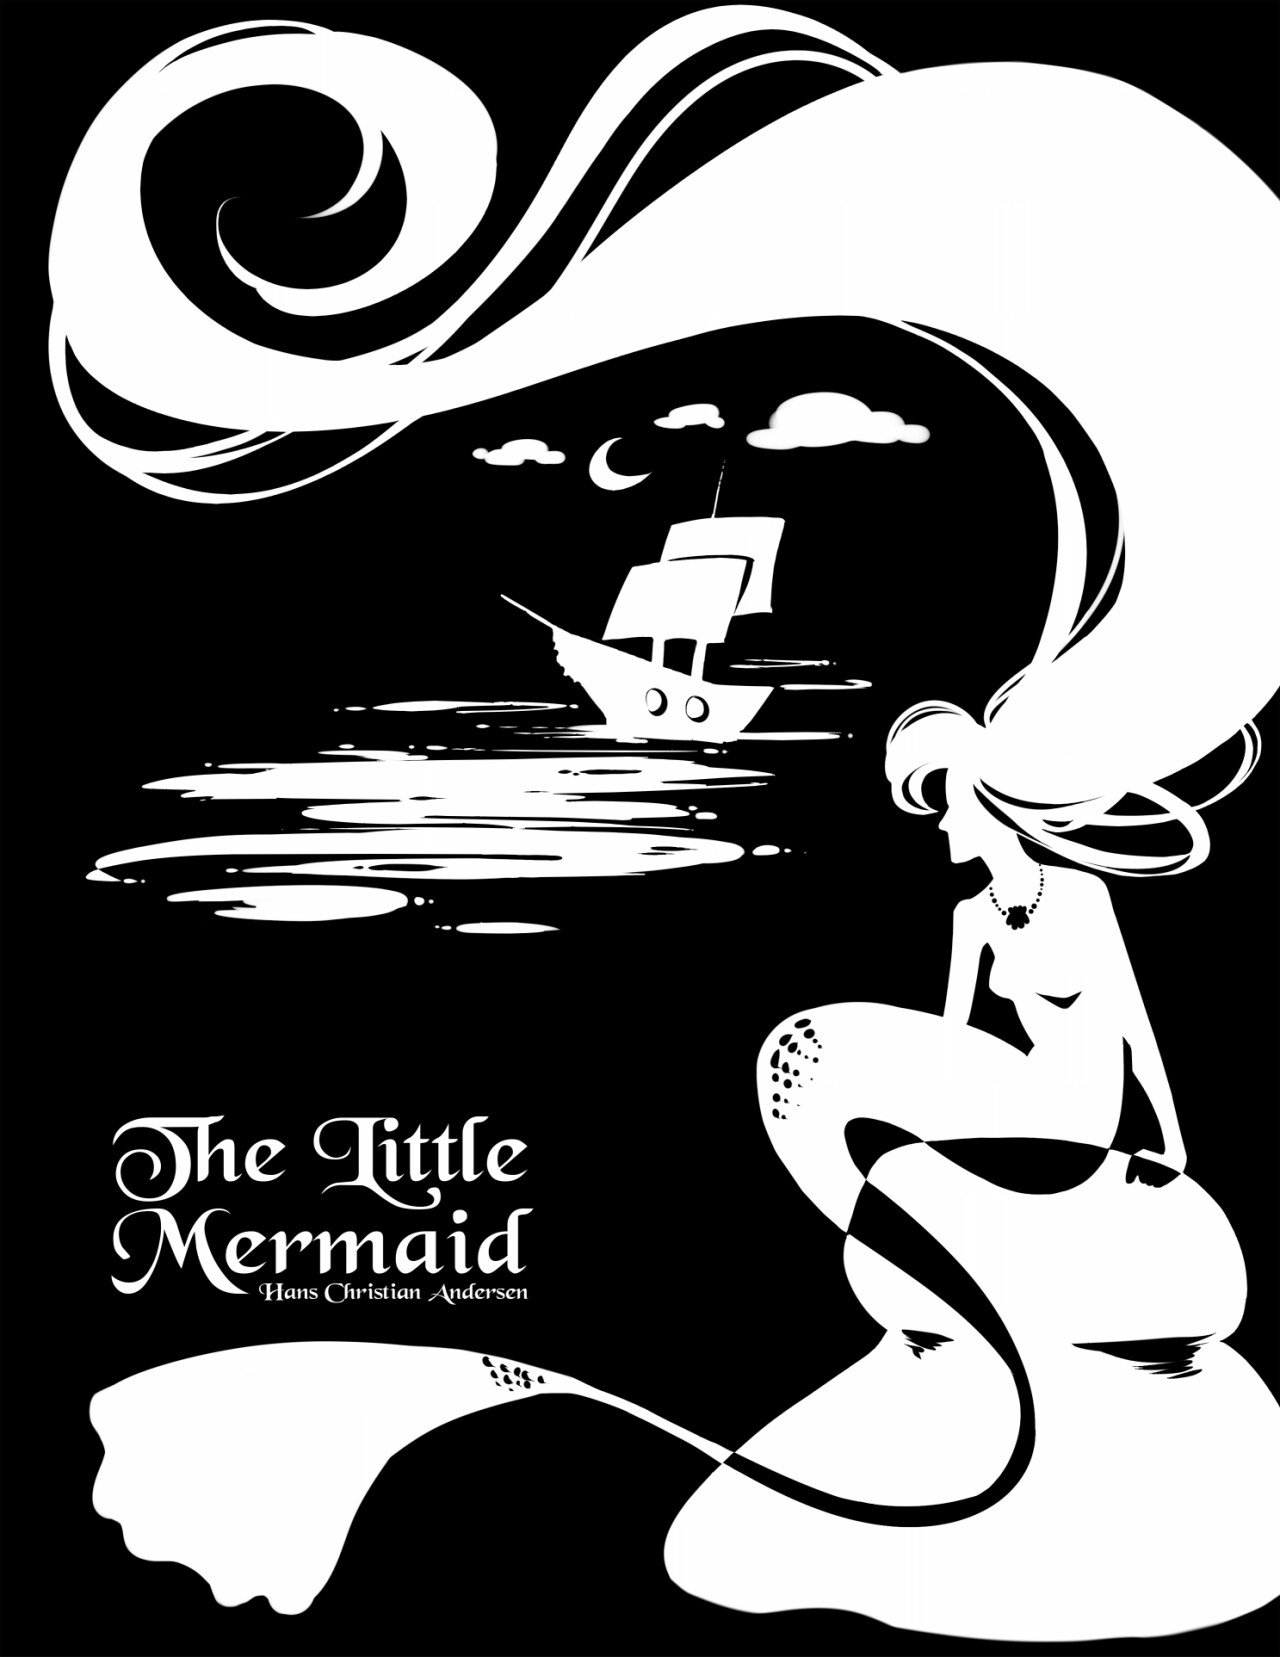 The Little Mermaid silhouette cover